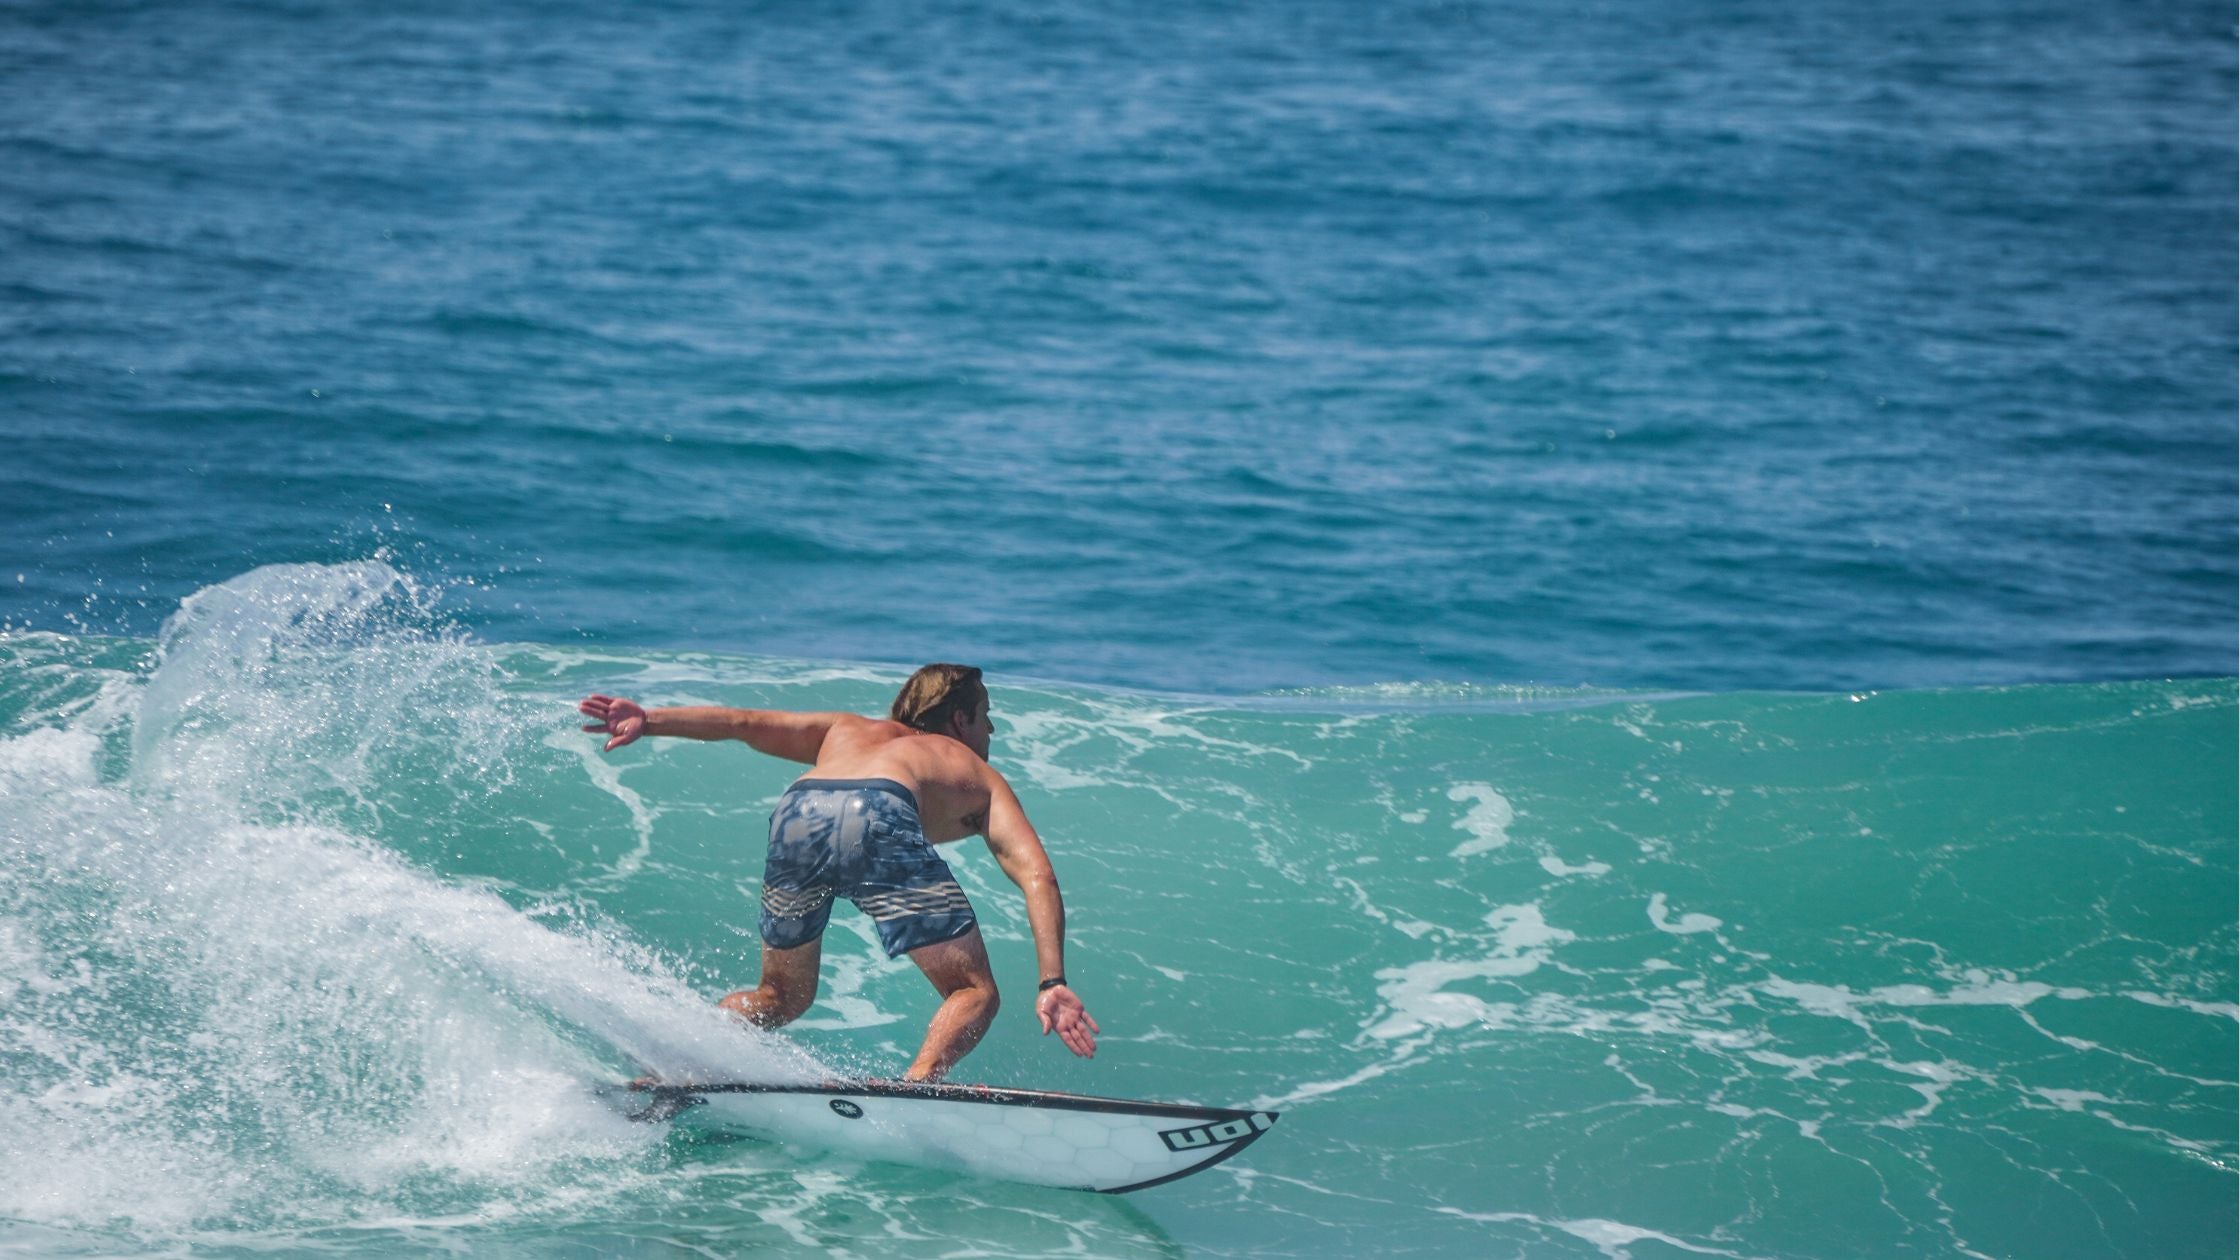 A surfer effortlessly carving a turn on a wave, demonstrating the maneuverability of a properly sized surfboard.